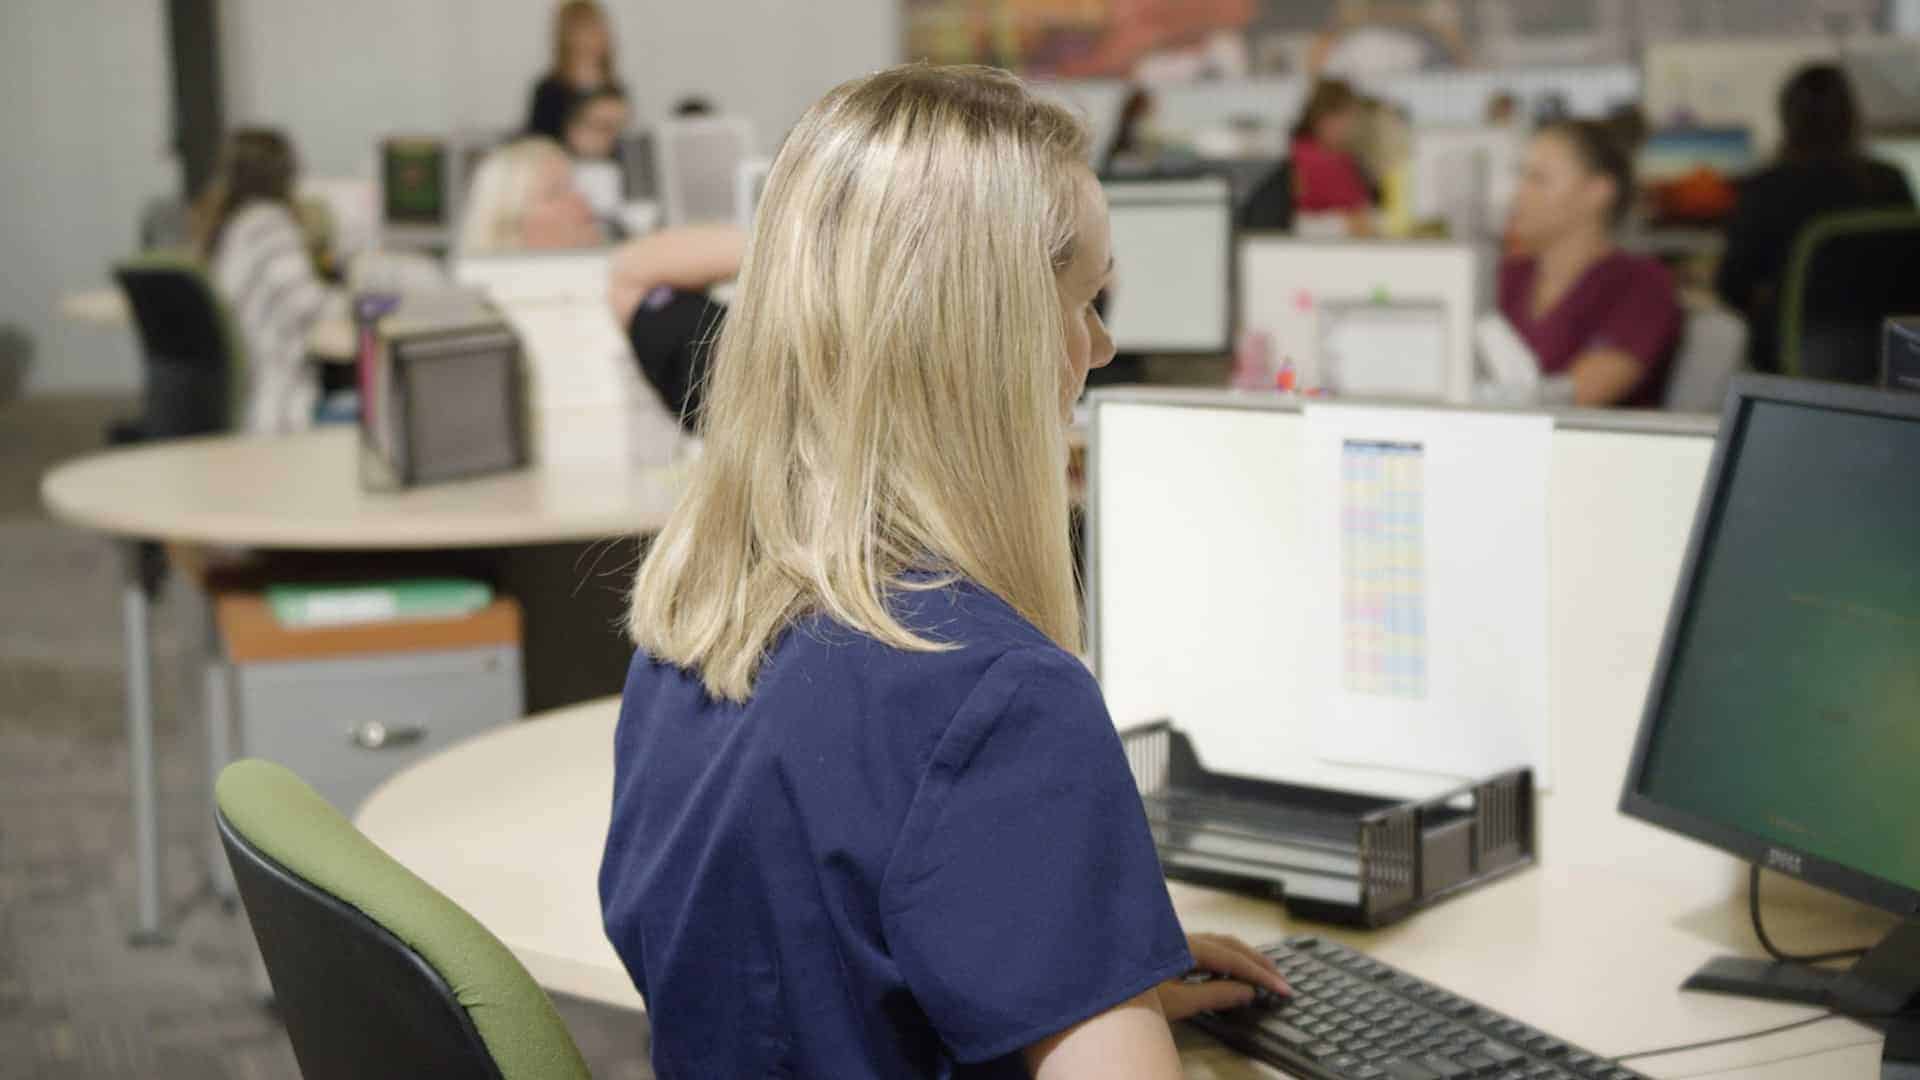 image of blonde woman at computer looking at rcm services from Med USA